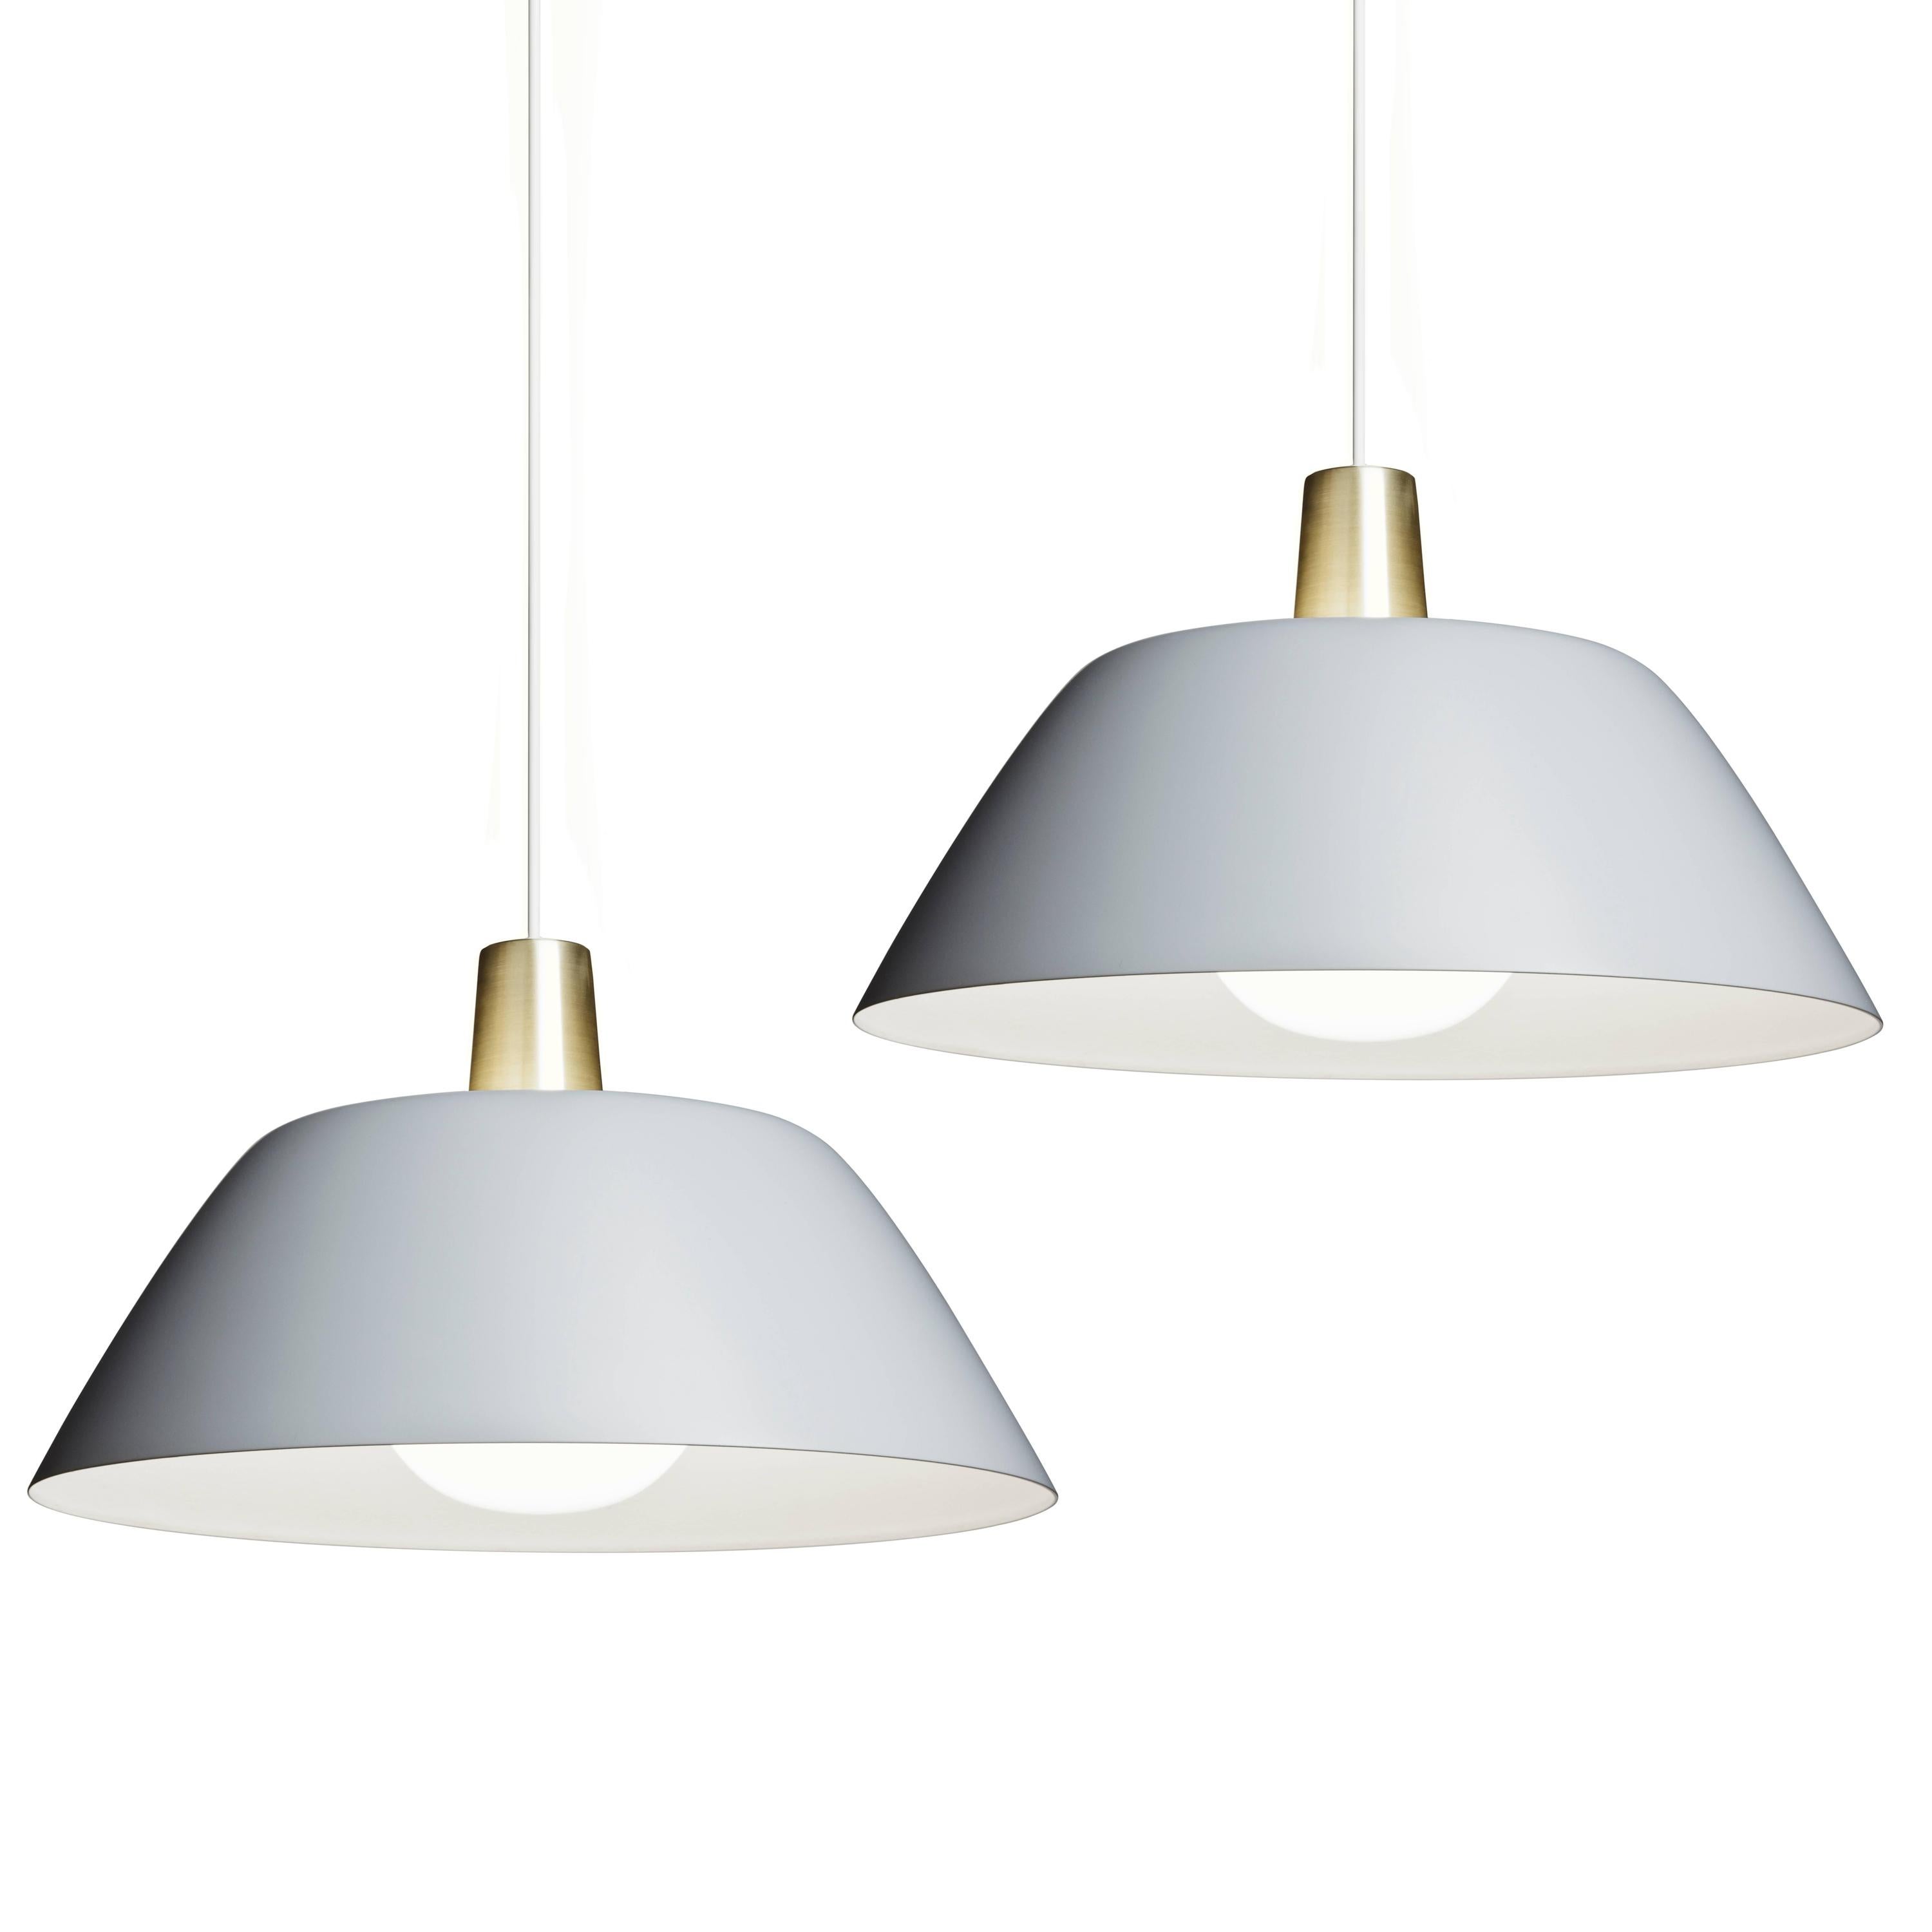 Pair of Lisa Johansson-Pape 'Ihanne' Pendant Lamps for Innolux Oy in Black In New Condition For Sale In Glendale, CA